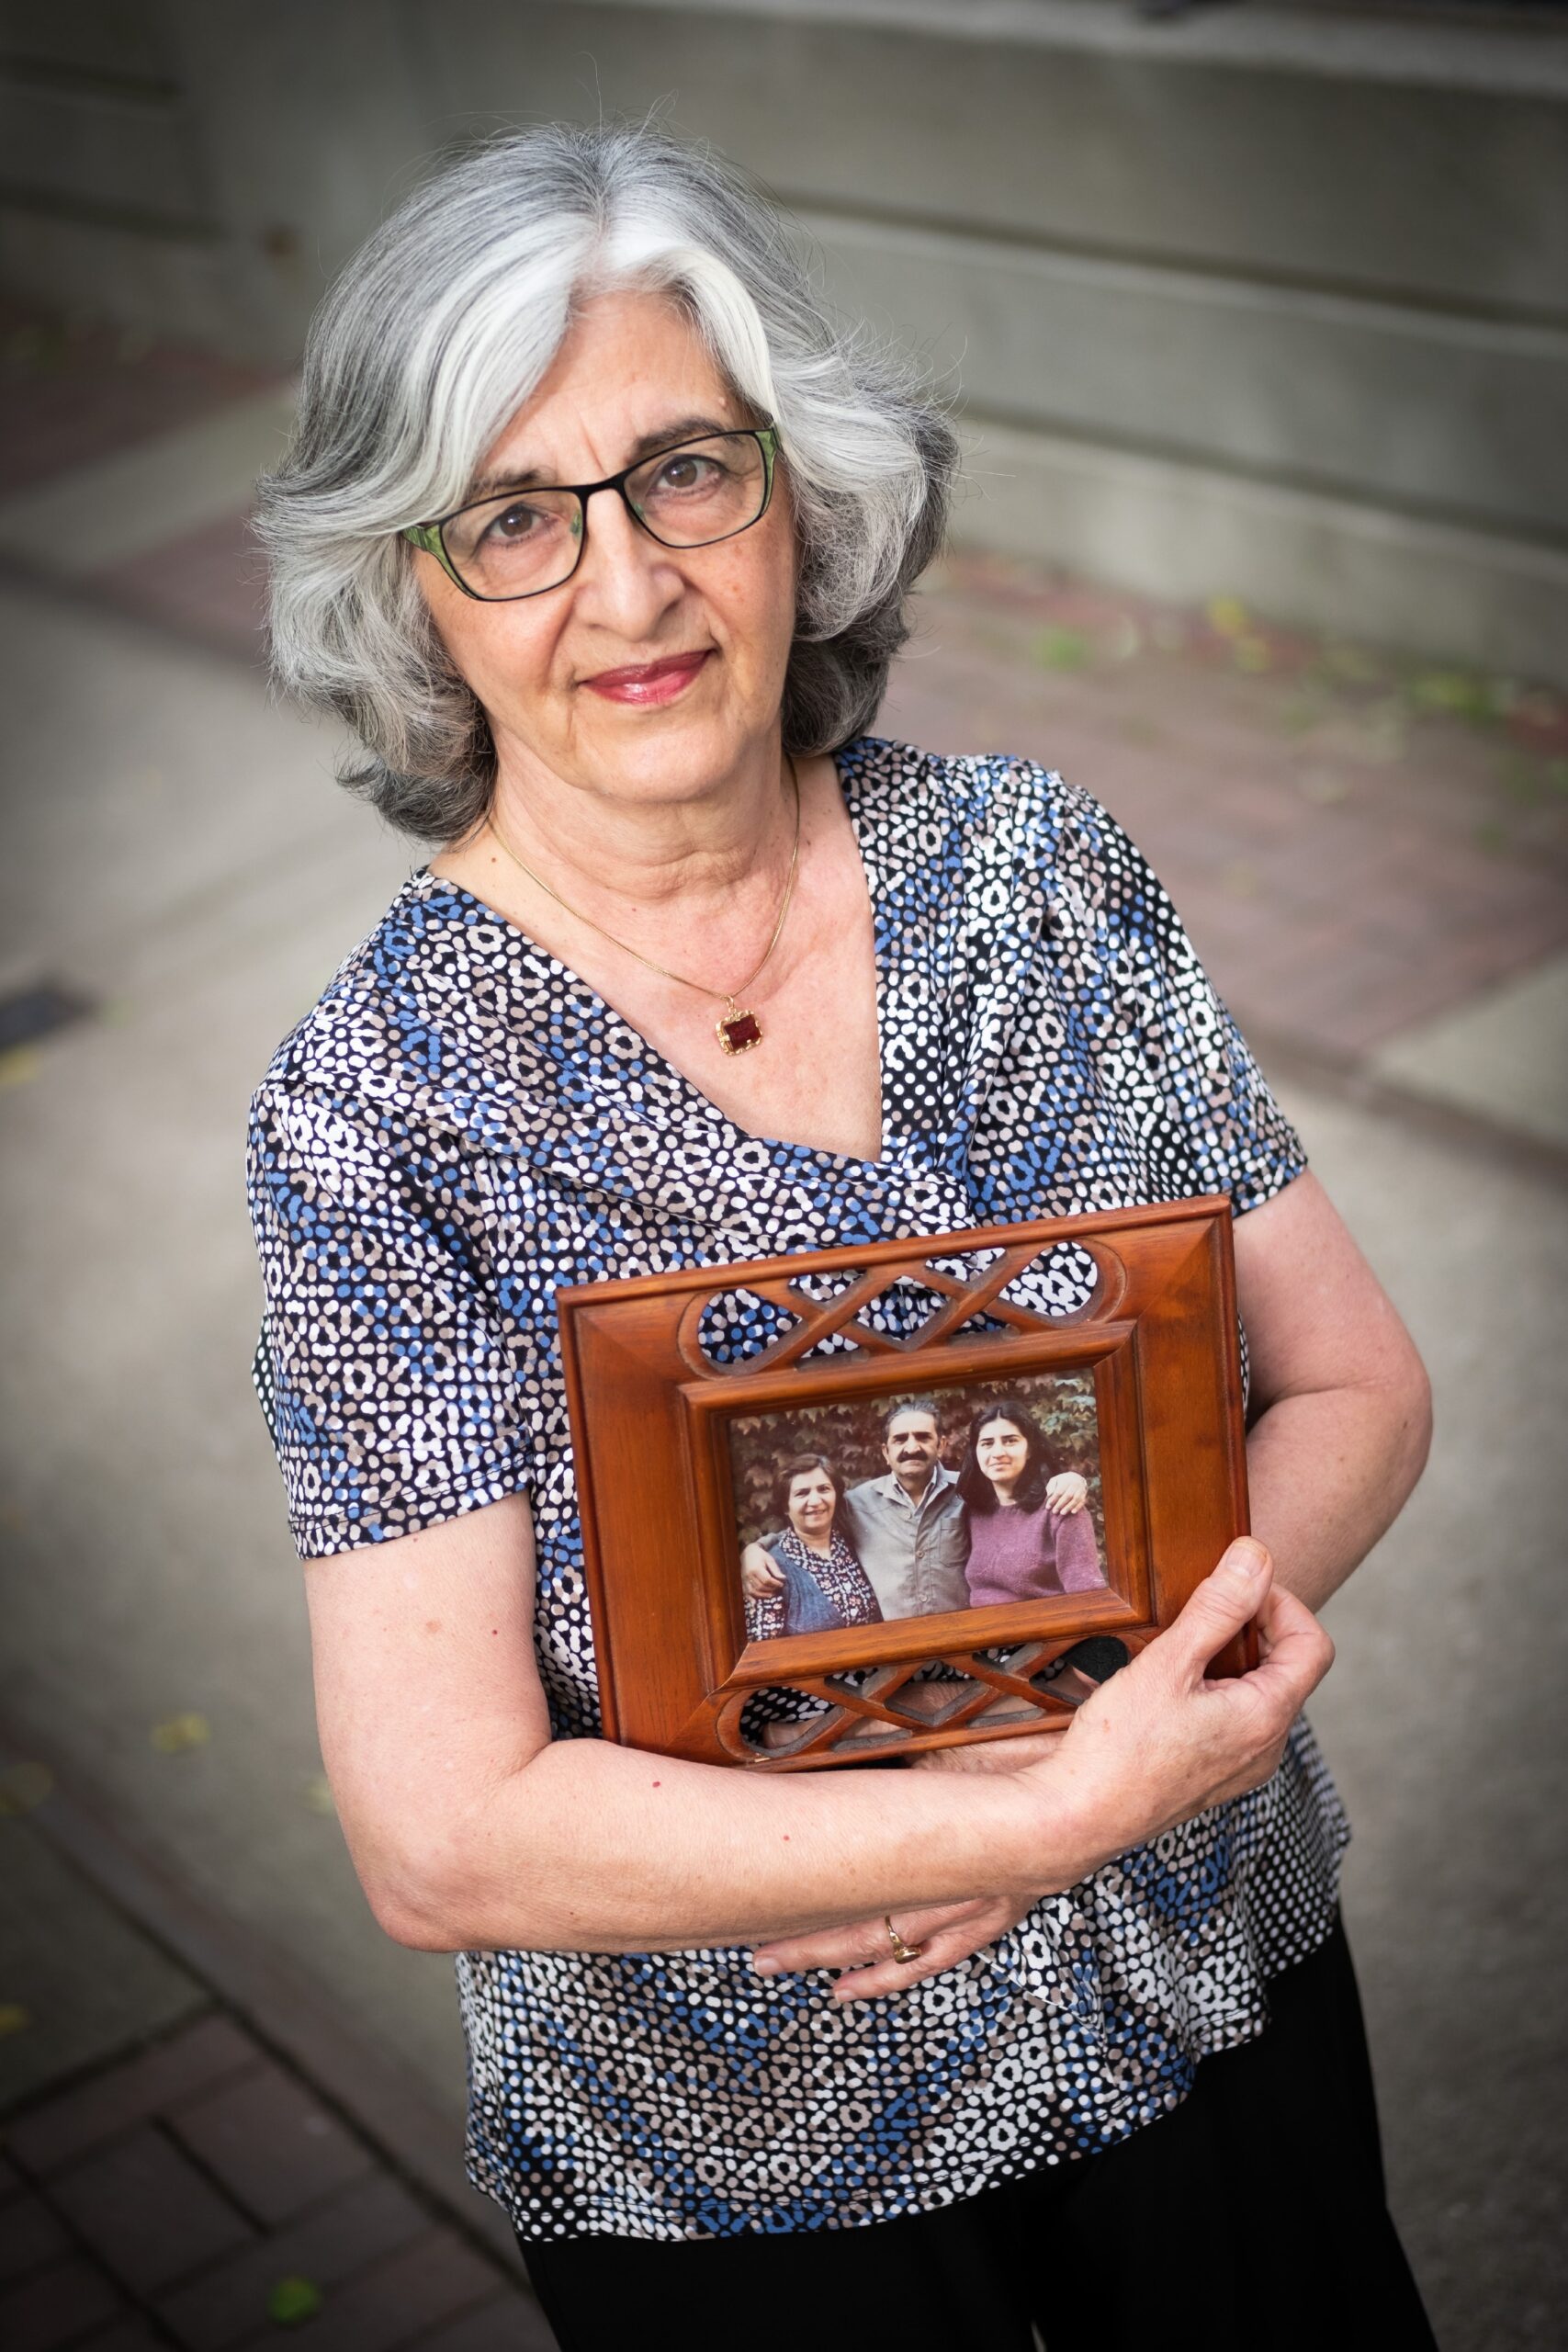 Nahid Mazloum, holds up a portrait of her mother Ezzat Janami Eshraghi, sister, Roya Eshraghi and her father, Enayatollah Eshraghi all of whom were executed in June 1983 in Iran for their belief in the Baha’i faith